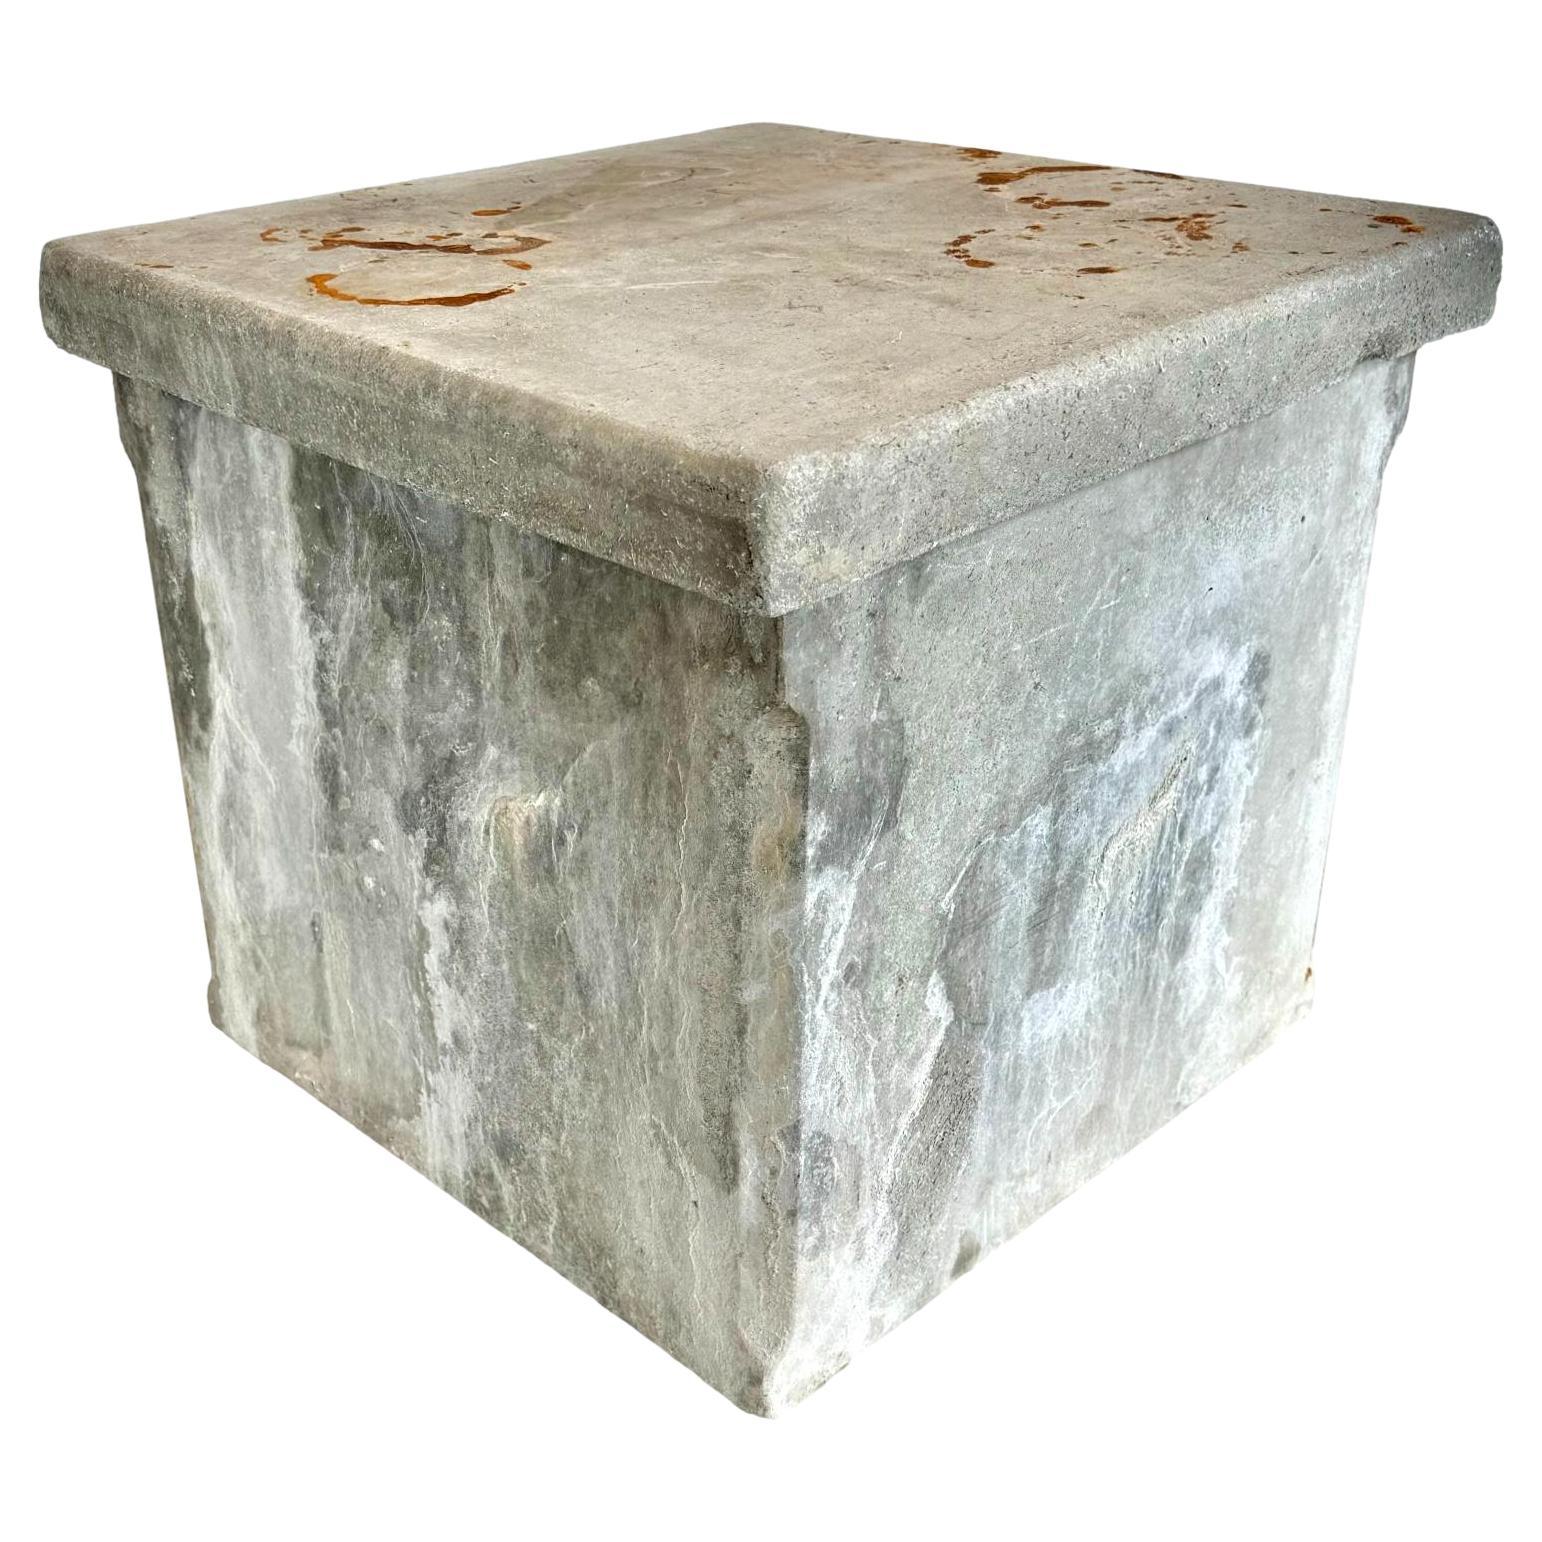 Willy Guhl Concrete Box with Lid, 1960s Switzerland For Sale